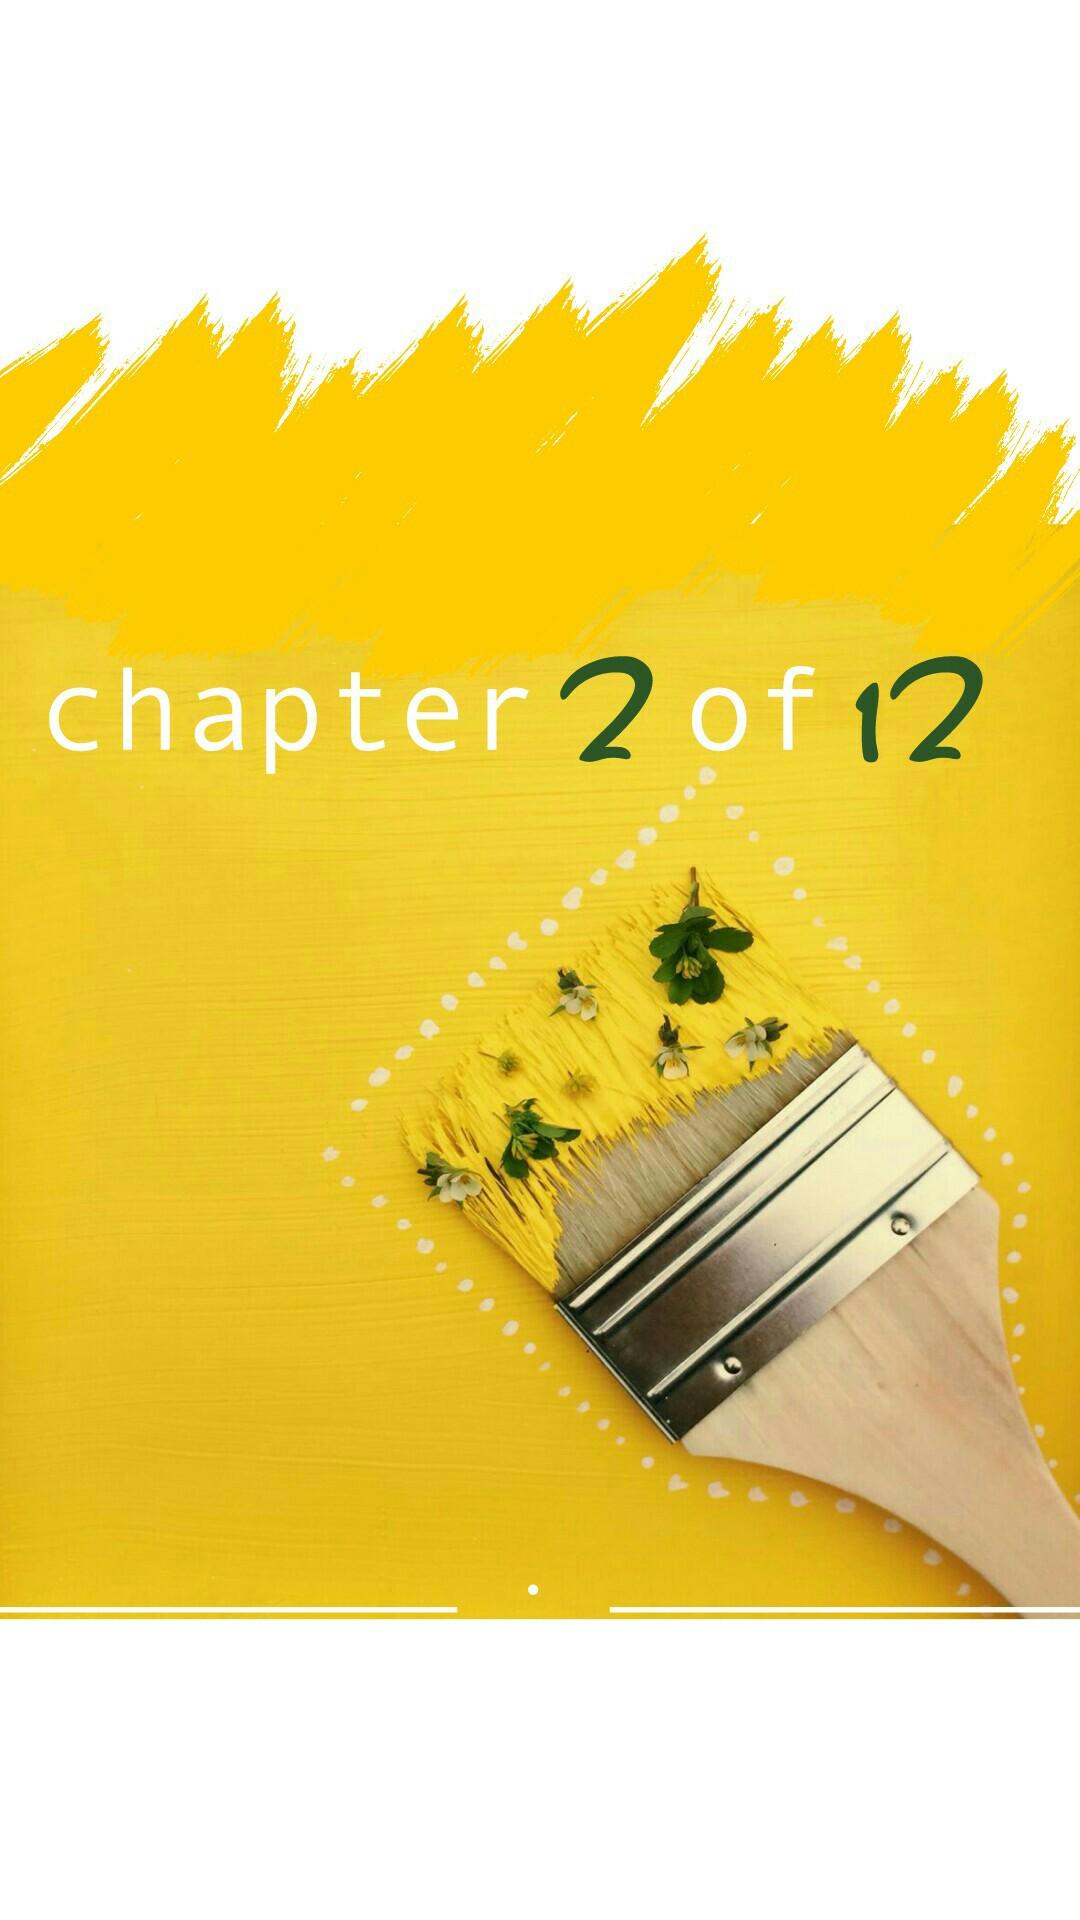 ~T~chapter 2~A~of 12~P~
HELLO FEBRUARY :)